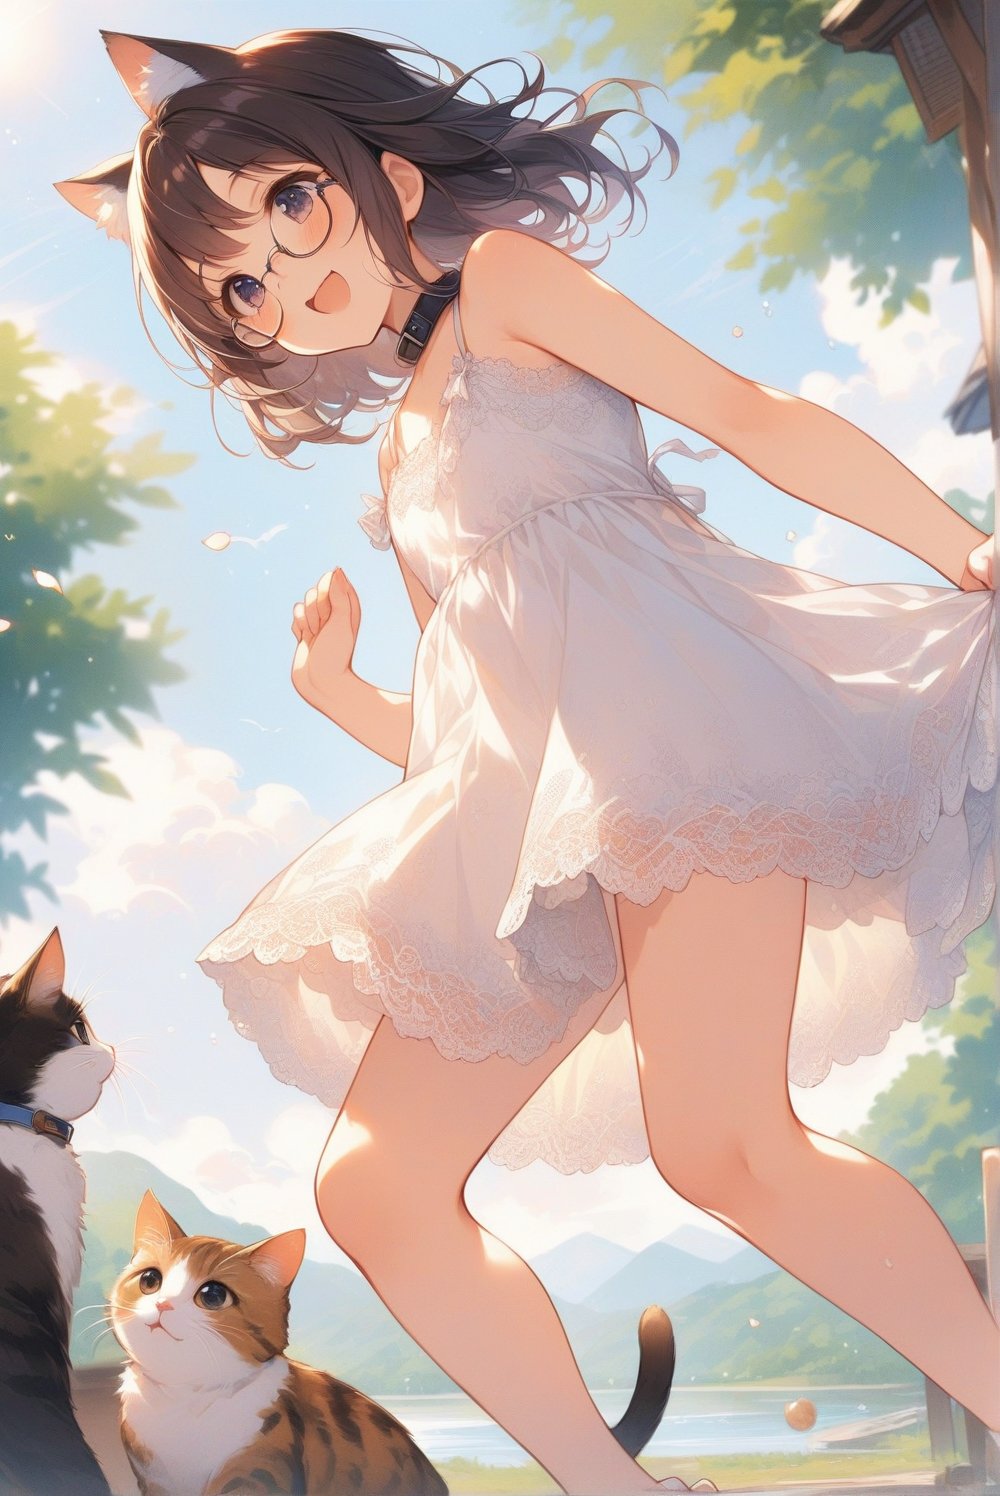 beautiful details, uniform 8K wallpaper, high resolution, exquisite texture in every detail,  beautiful illustration,manga touch

1girl, (((very young girl))), shyness,
summer, japanese countryside, in lakeside,
white Summer-like camisole dress , blue line ribbon, lots of lace,

((nekomimi)),Cat ears the same color as her hair,
short hair, open mouth, (glasses), round eyes, cat collar, , black hair, smile, :3,

in the park, play with cats,
frying,  jumping, fluttering in the wind,

shot angle is slightly tilted, adding dynamic movement to the shot, shot from side and below,
, looking at another, look away, looking at cats,

nekomimimeganekao